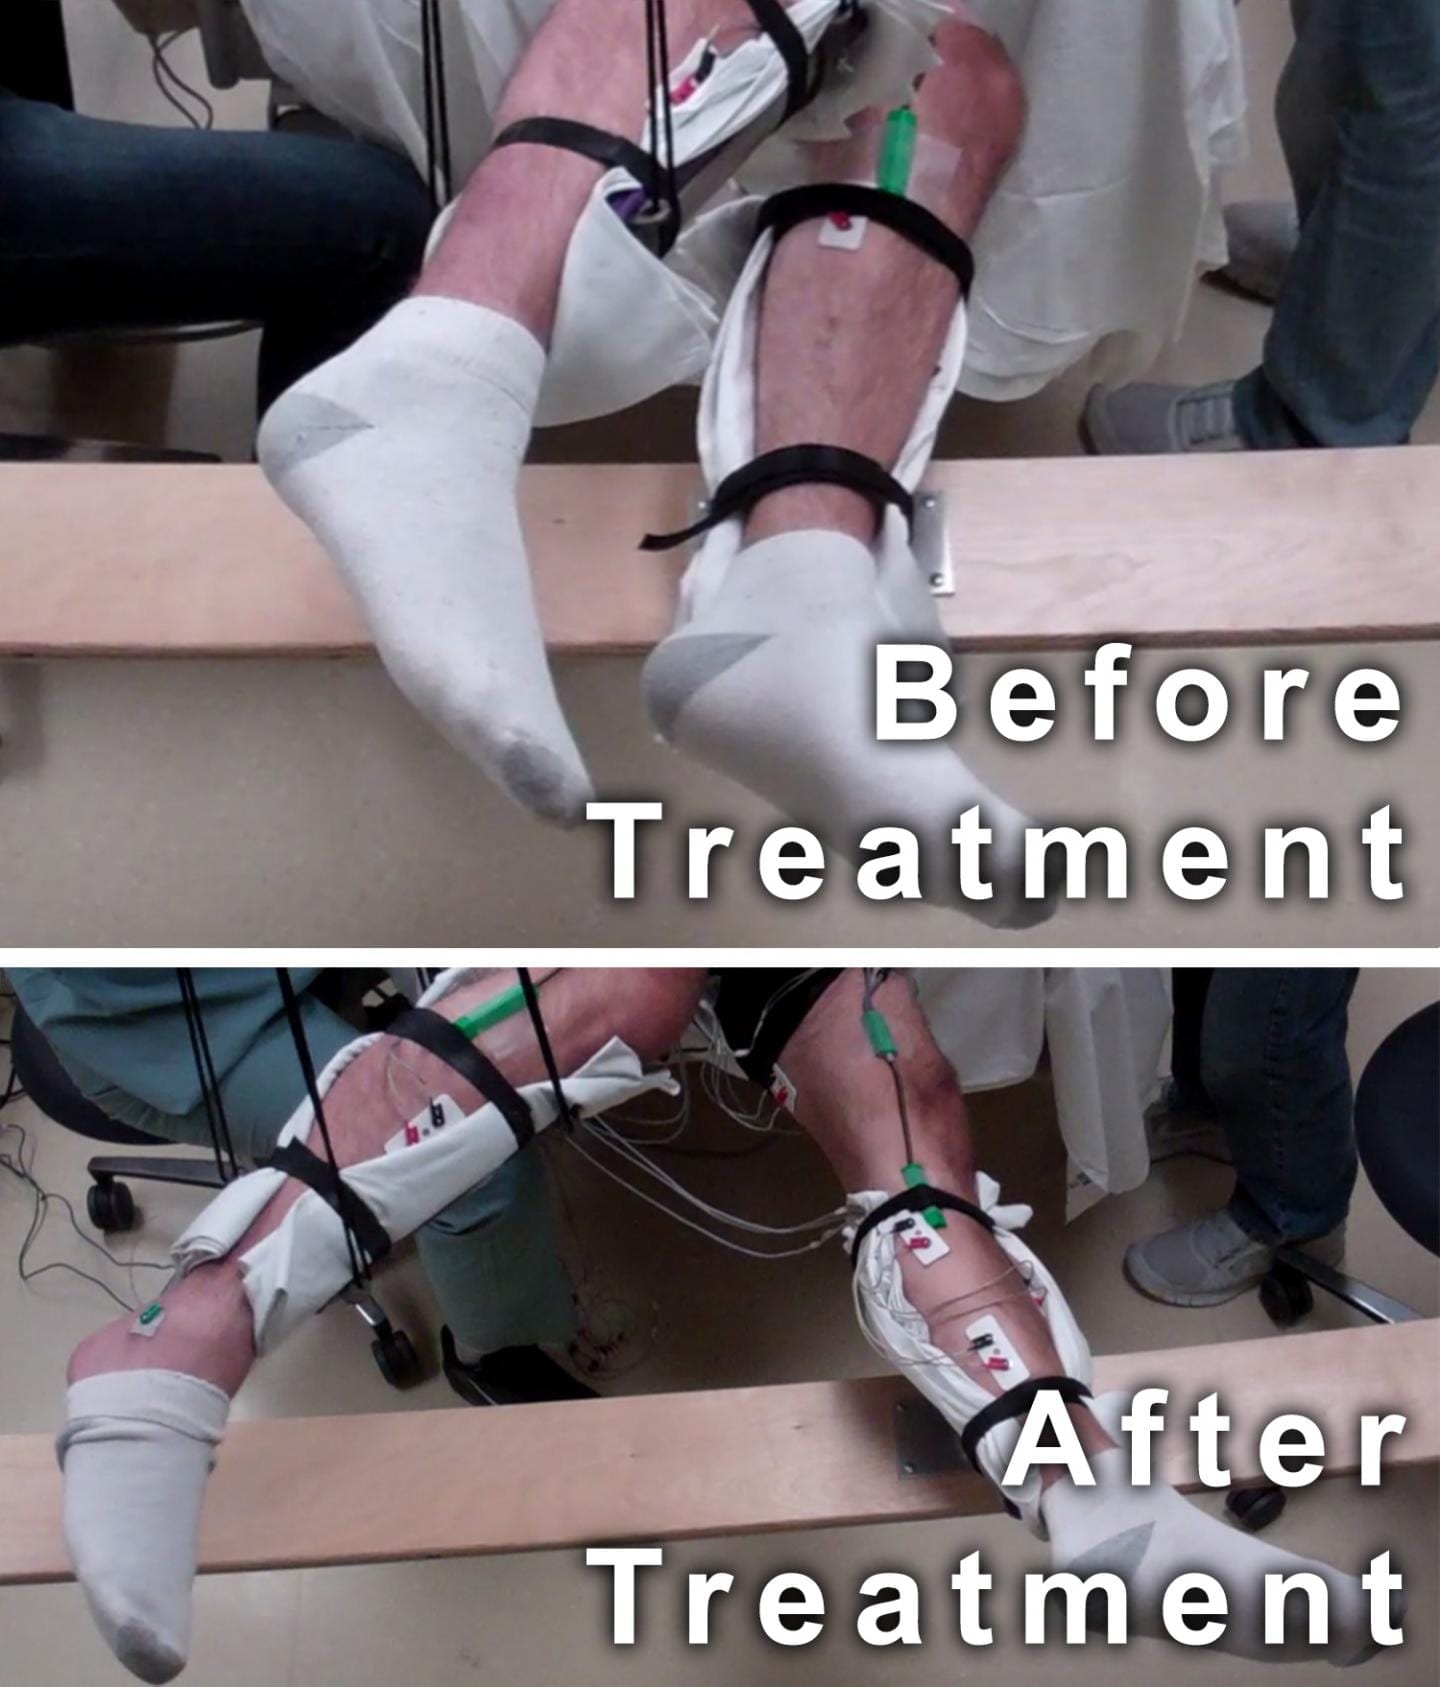 Paralyzed men move legs with new non-invasive spinal cord stimulation